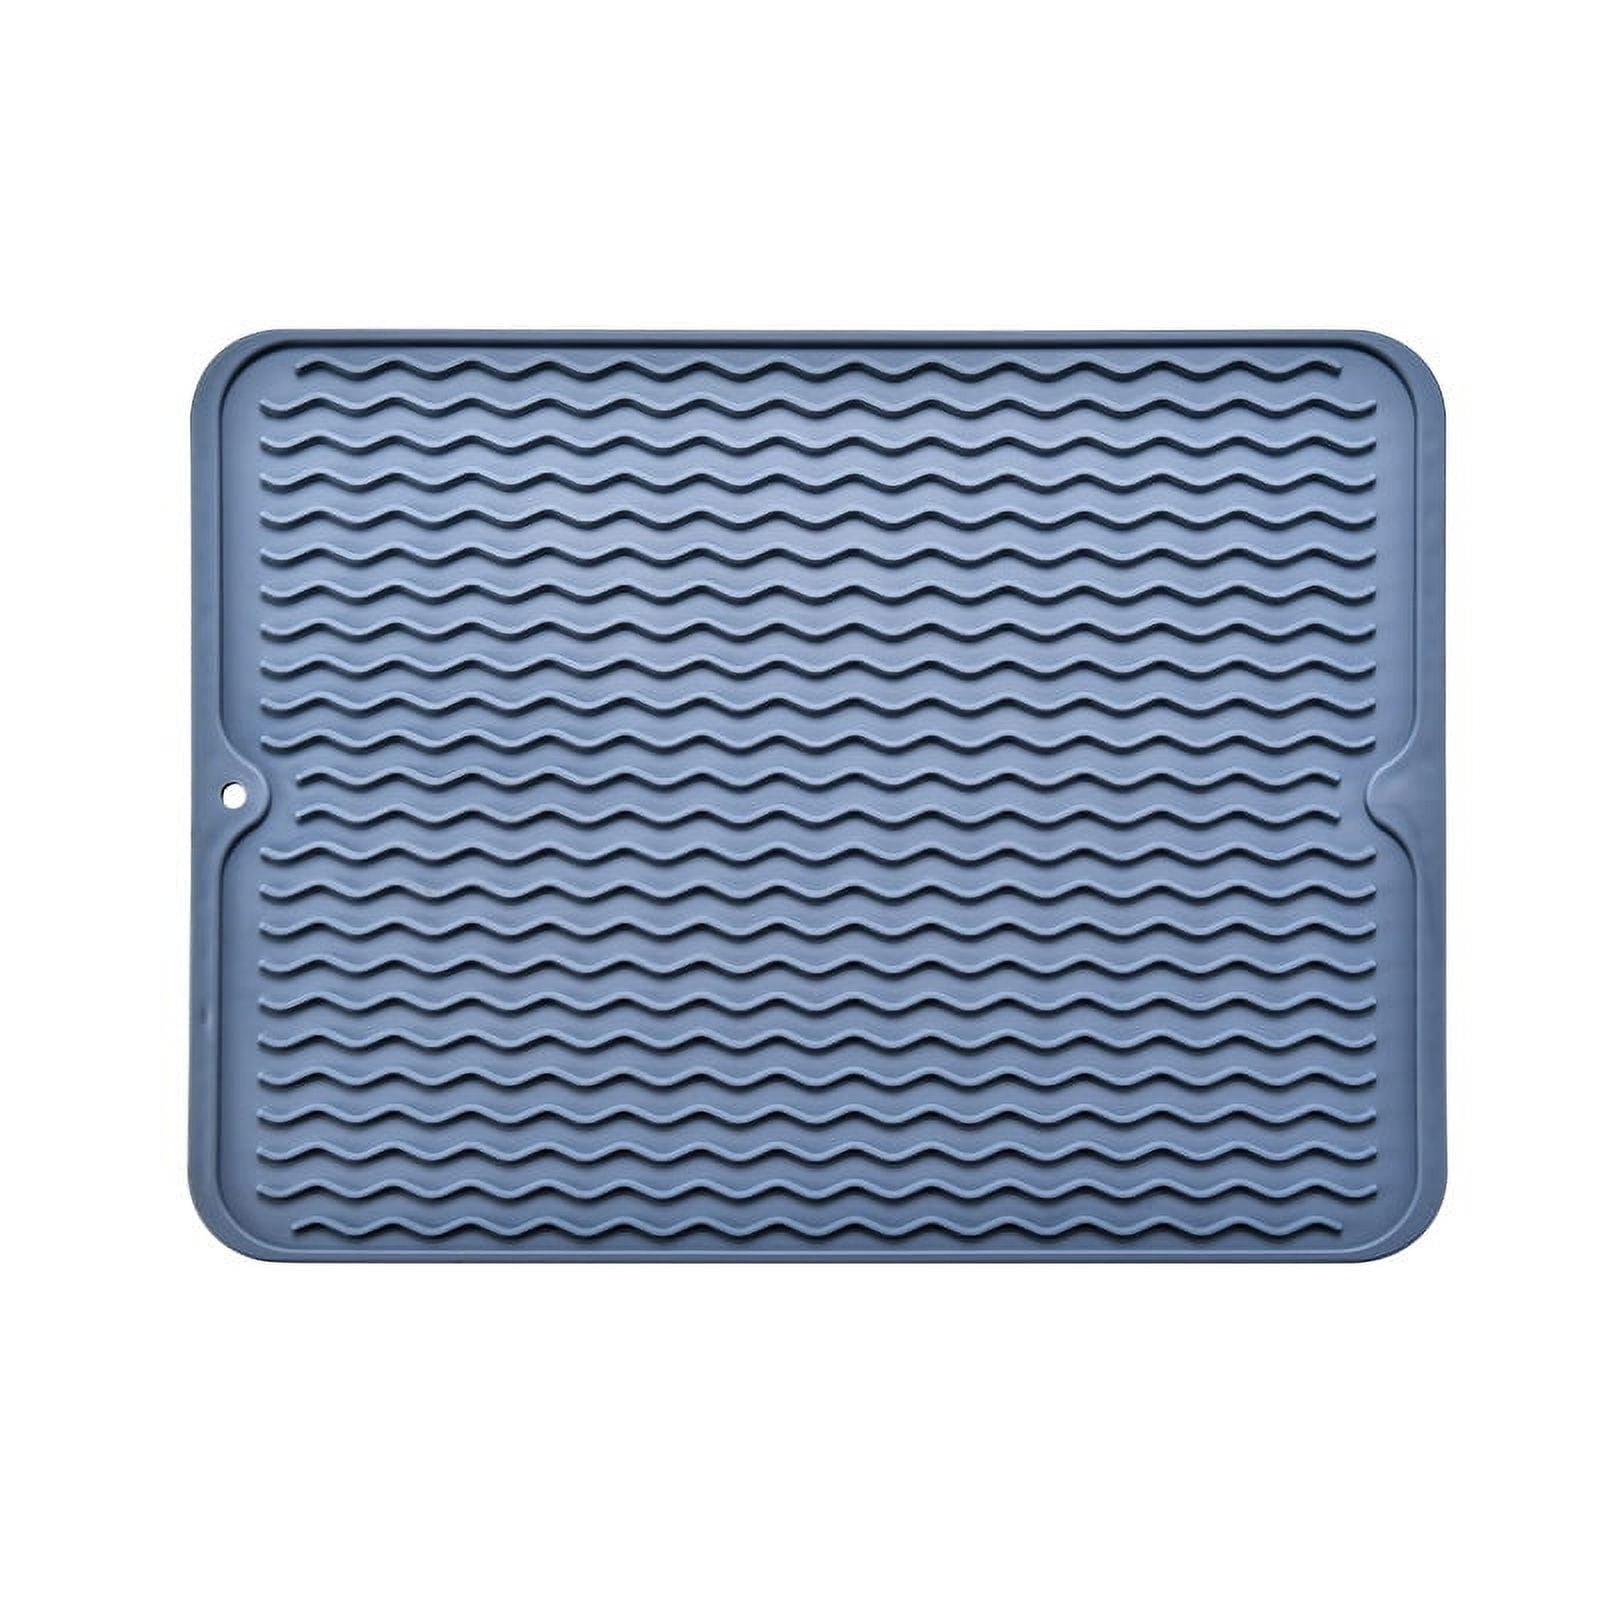 15.7x11.8in Silicone Trivet Mat for Hot Pan and Pot Hot Pads Counter Heat  Resistant Table Dish Drying Mat or Placemats,Blue 